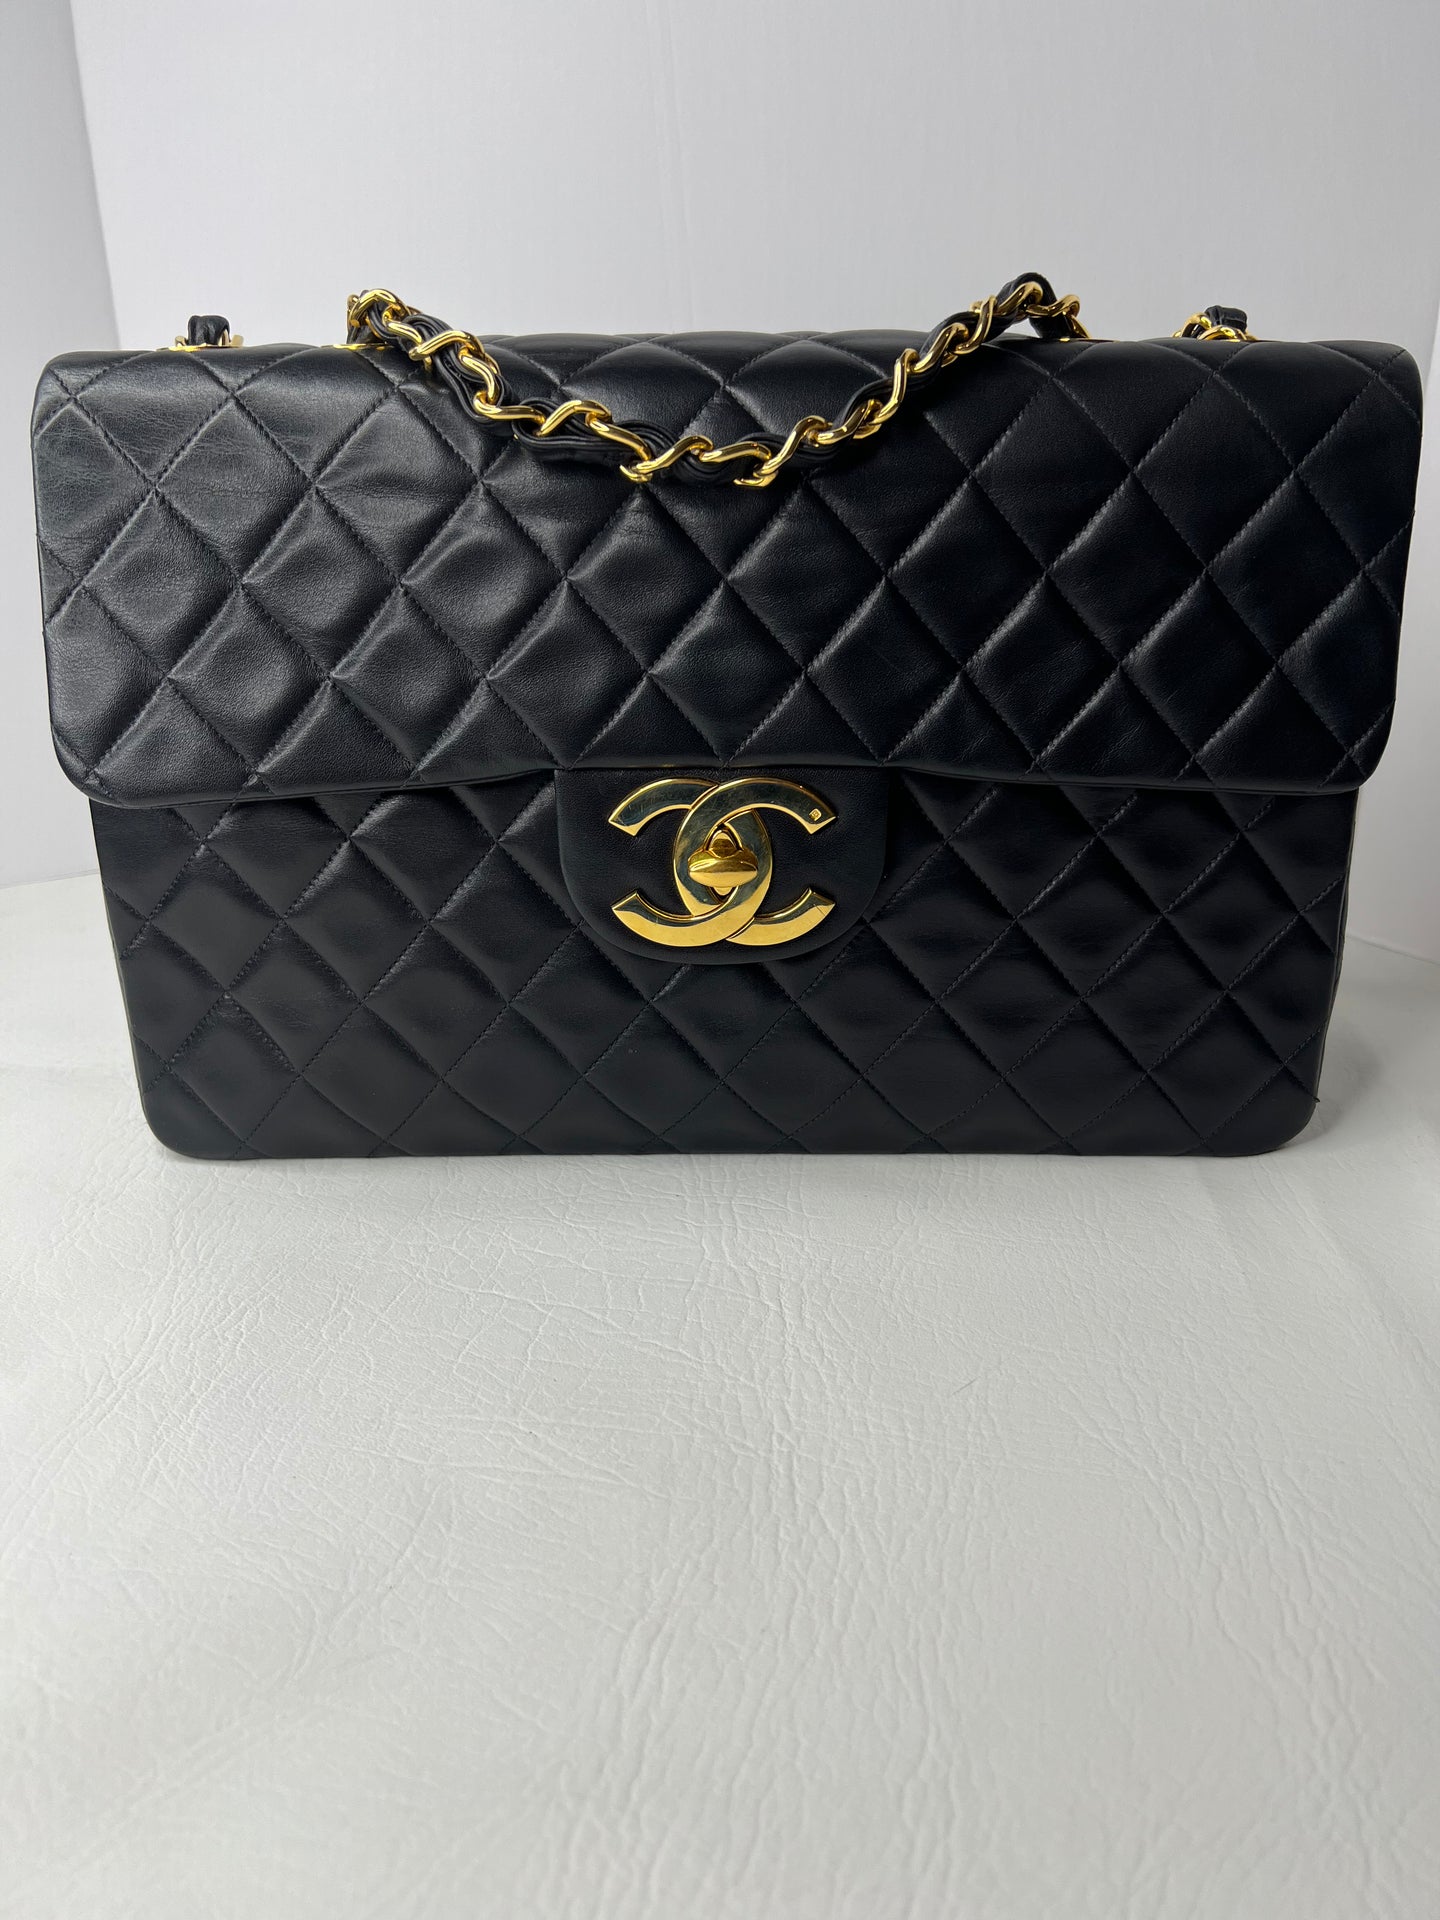 Auth Chanel Black Quilted Leather Vintage Maxi Flap Bag with 24kt Gold plated